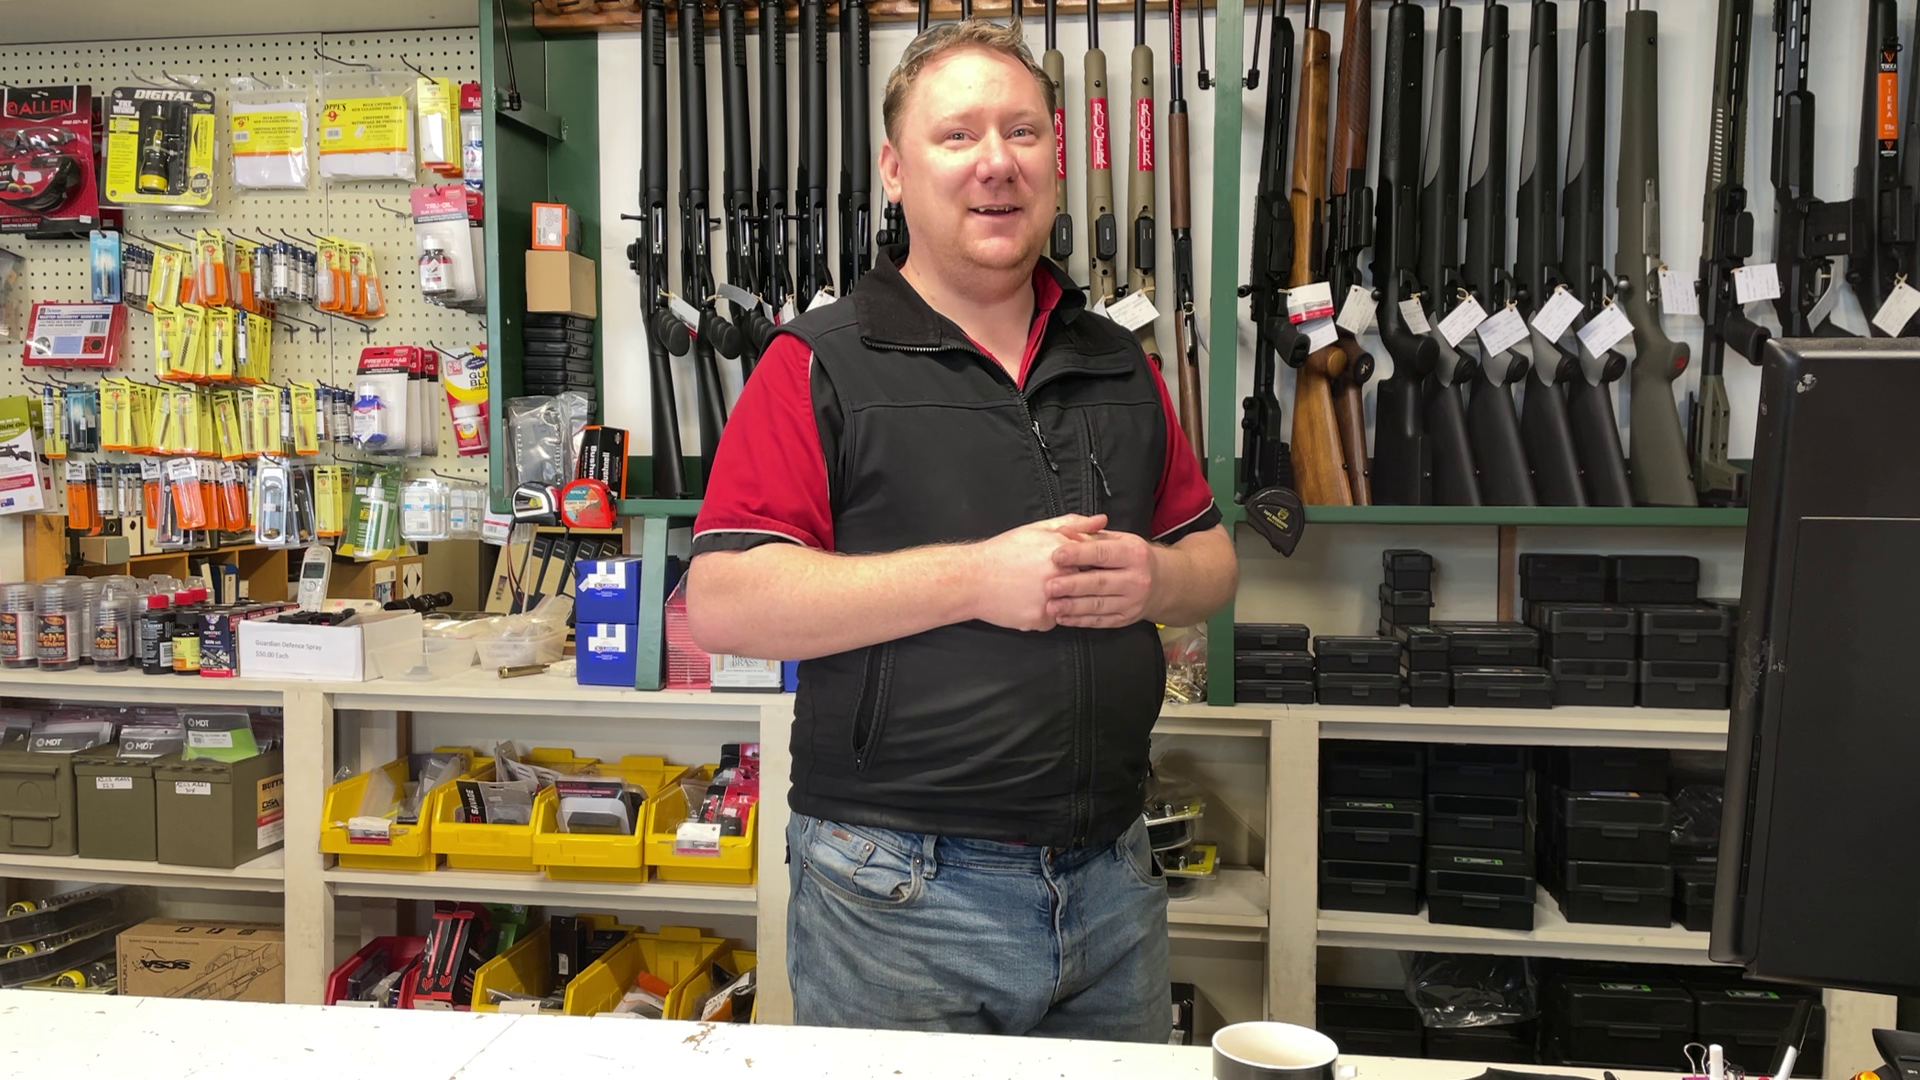 Zaine Beaton, owner of Beaton Guns, stands happily in his store as he speaks with a reporter. 